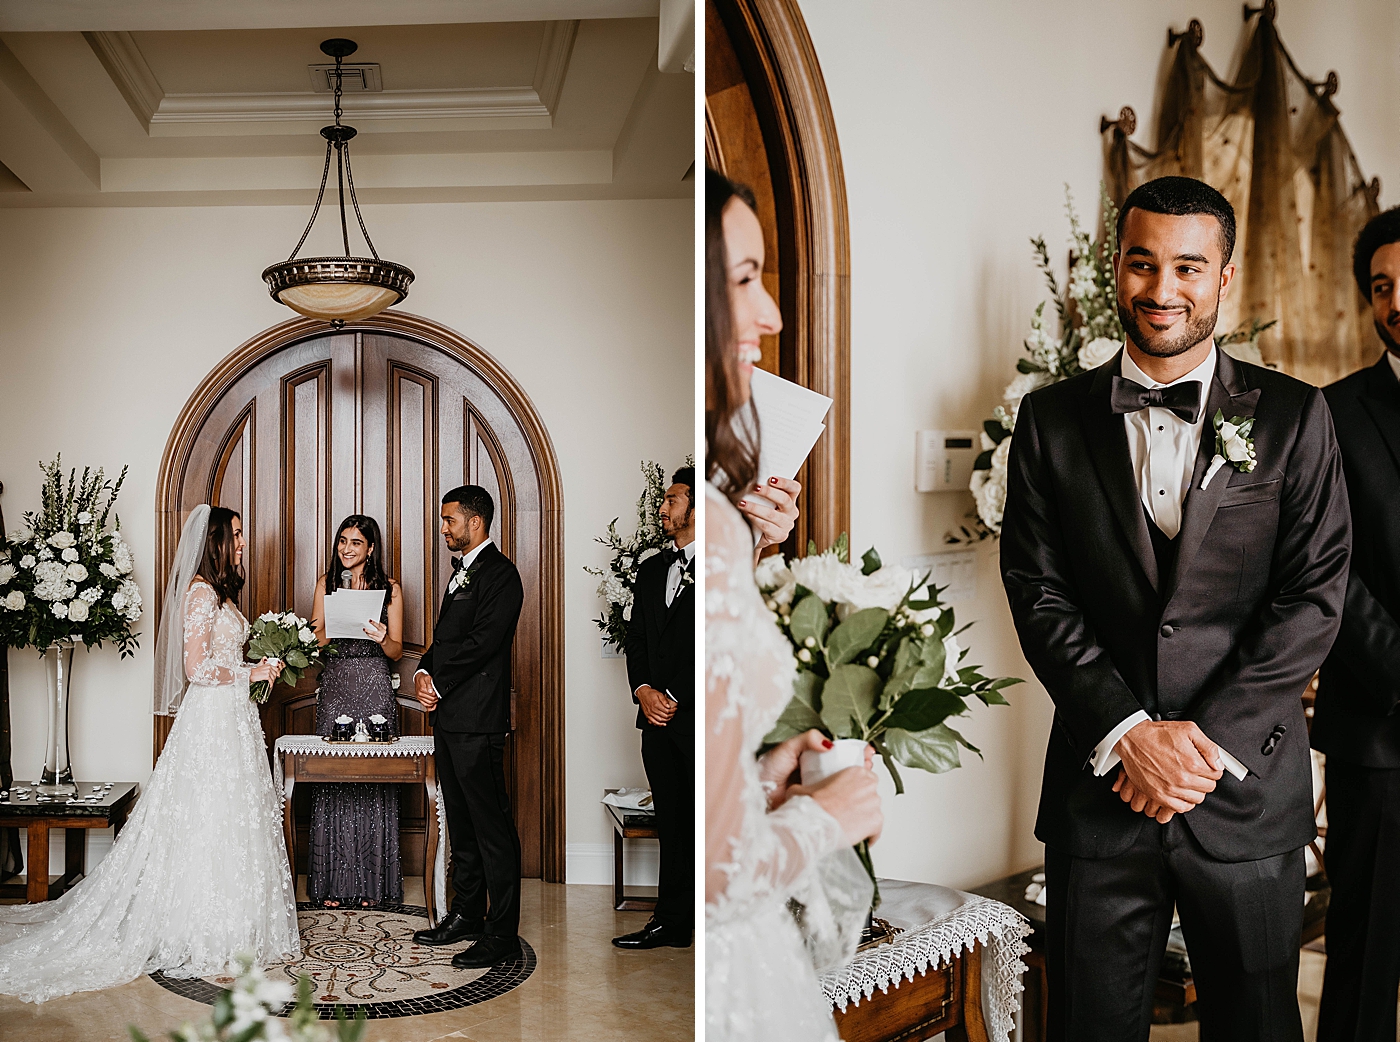 Ceremony Bride and Groom at the alter Intimate Home Wedding captured by South Florida Wedding Photographer Krystal Capone Photography